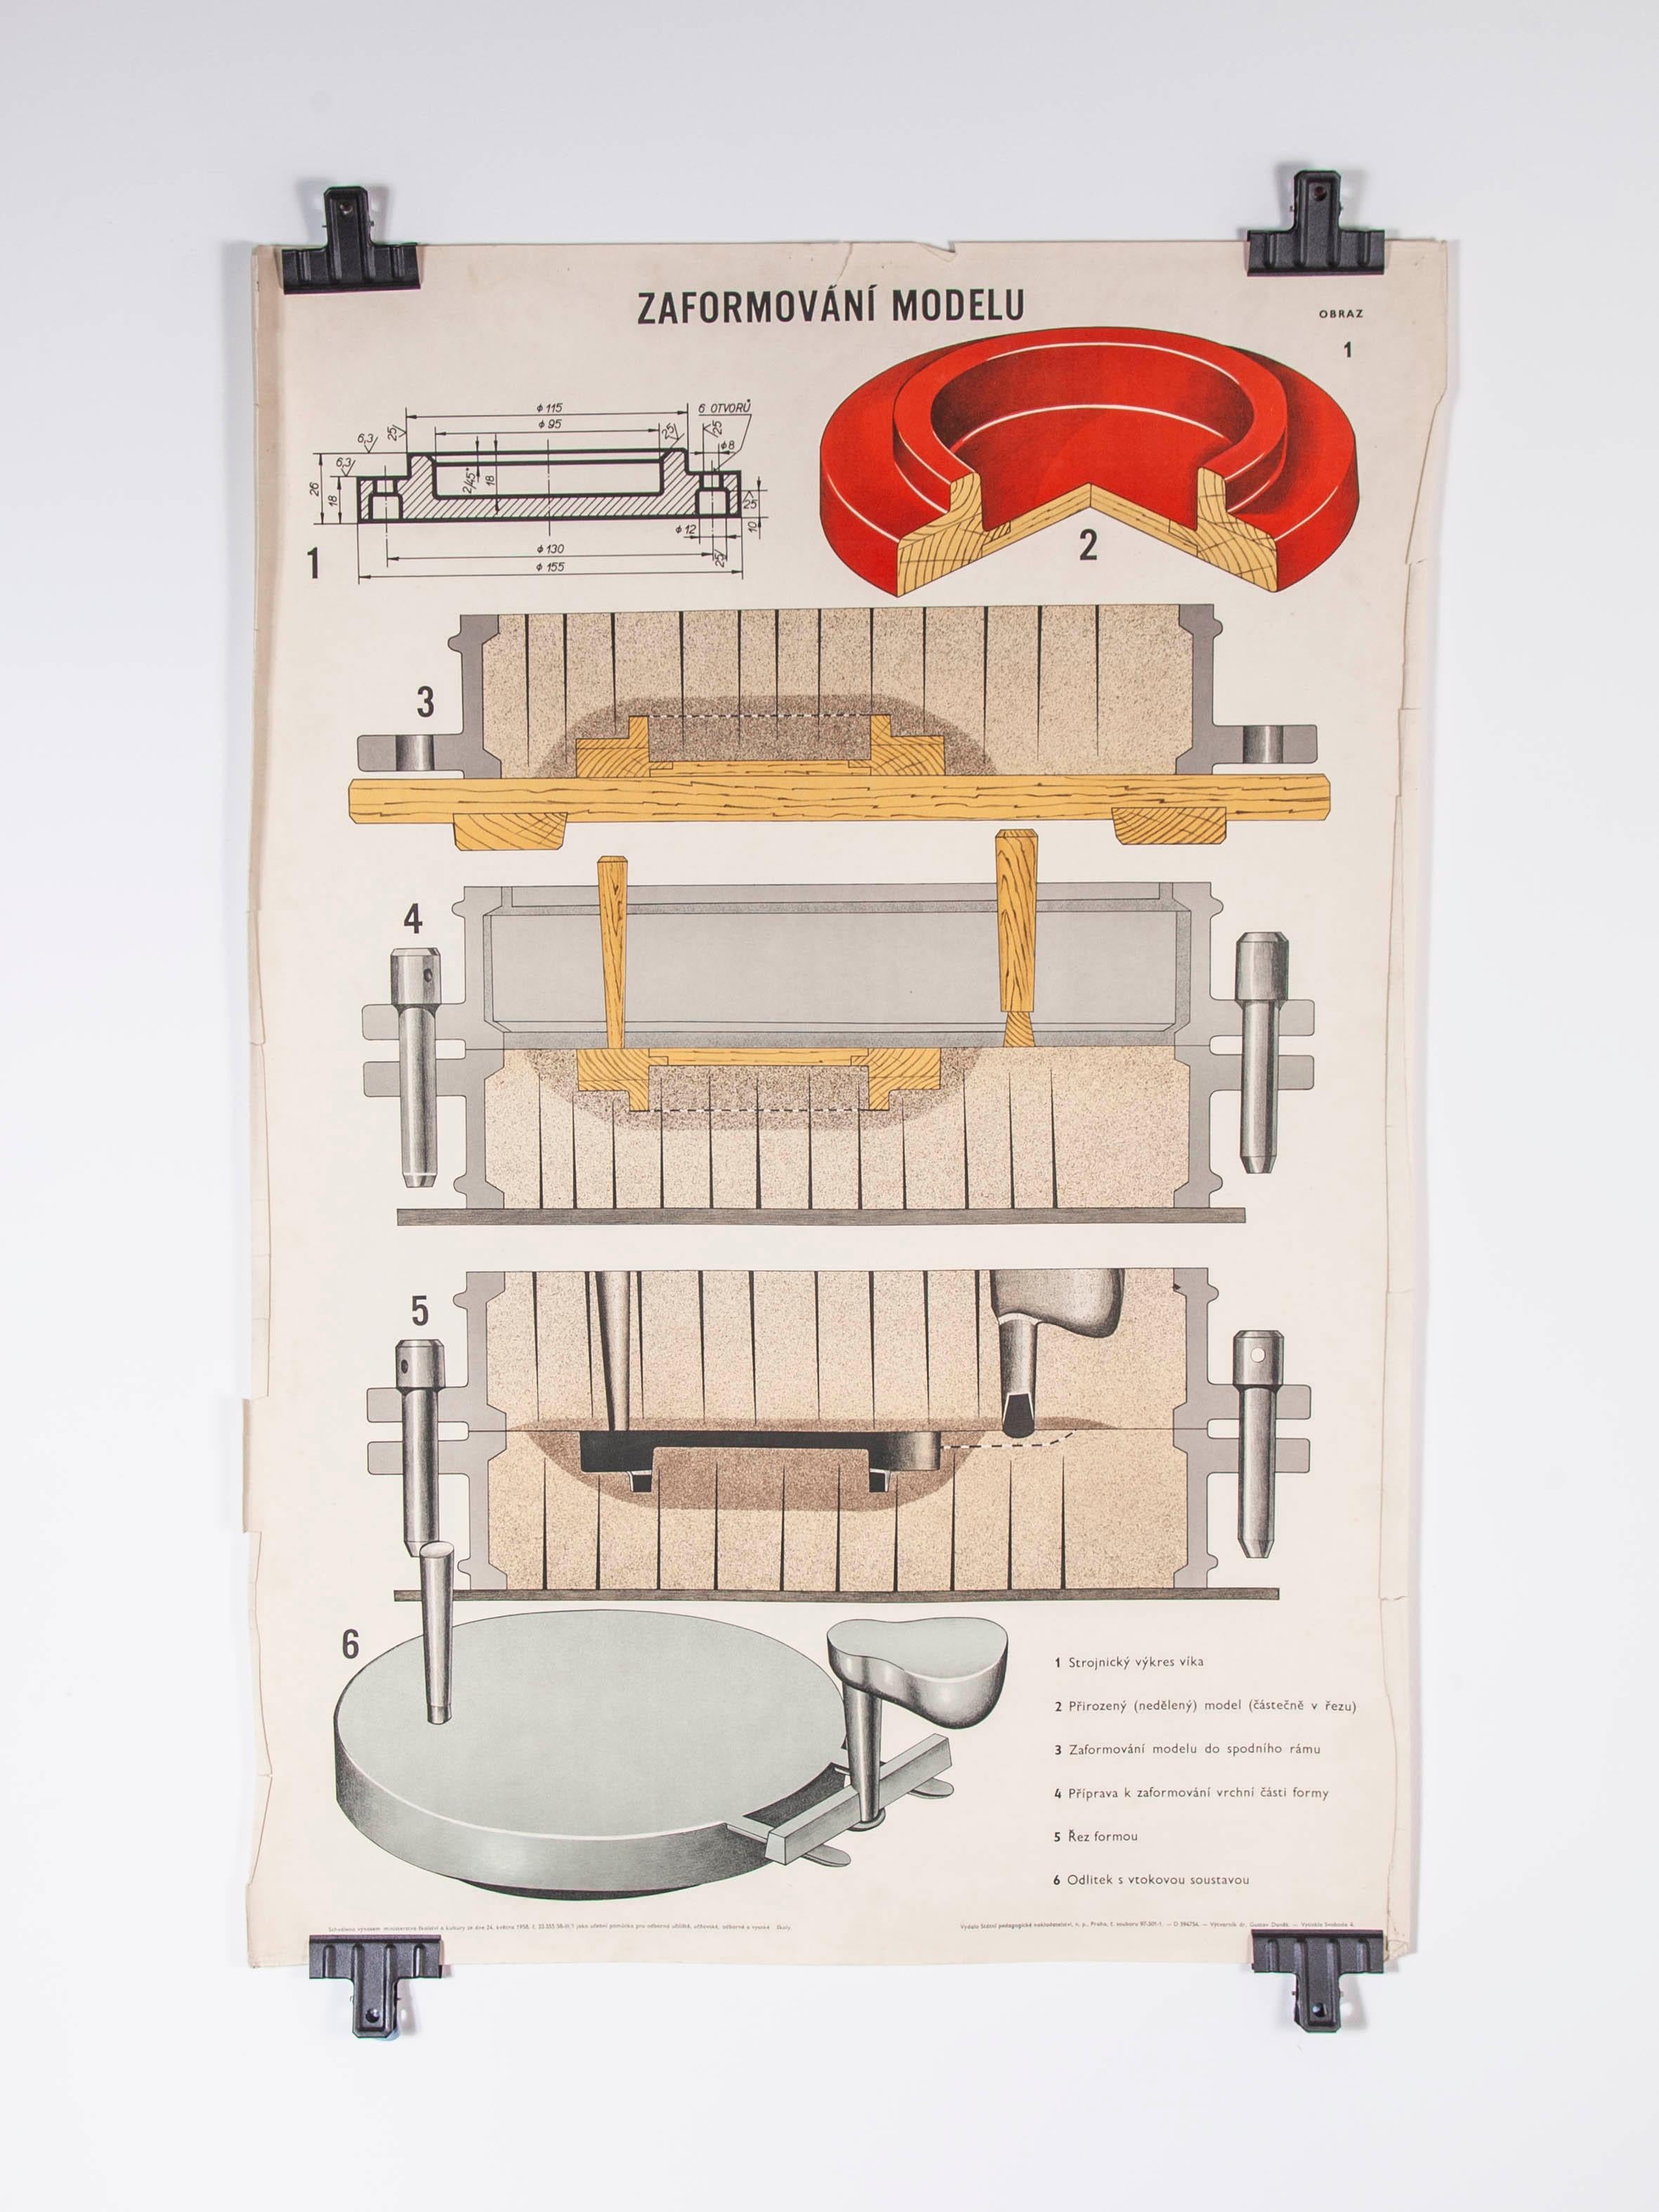 Czech technical industrial drawing, foundry Mould engineering poster – 8

Sourced from an old engineering workshop in the Czech Republic, an amazing series of technical Industrial drawings explaining the process of sand casting and creating the